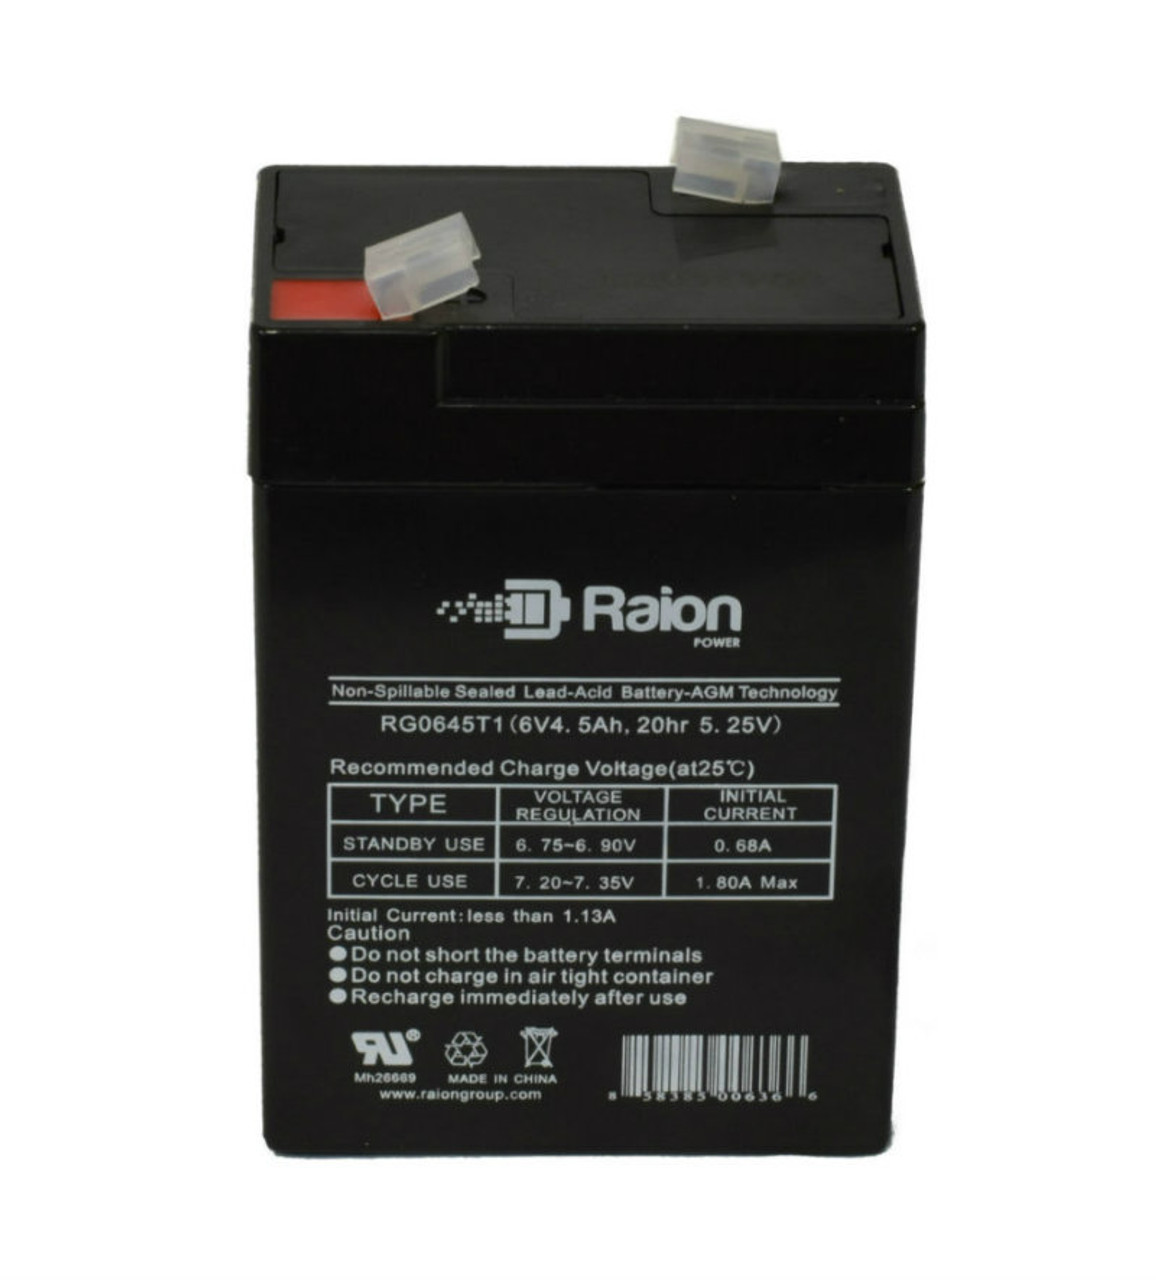 Raion Power RG0645T1 Replacement Battery Cartridge for Mule BKM2